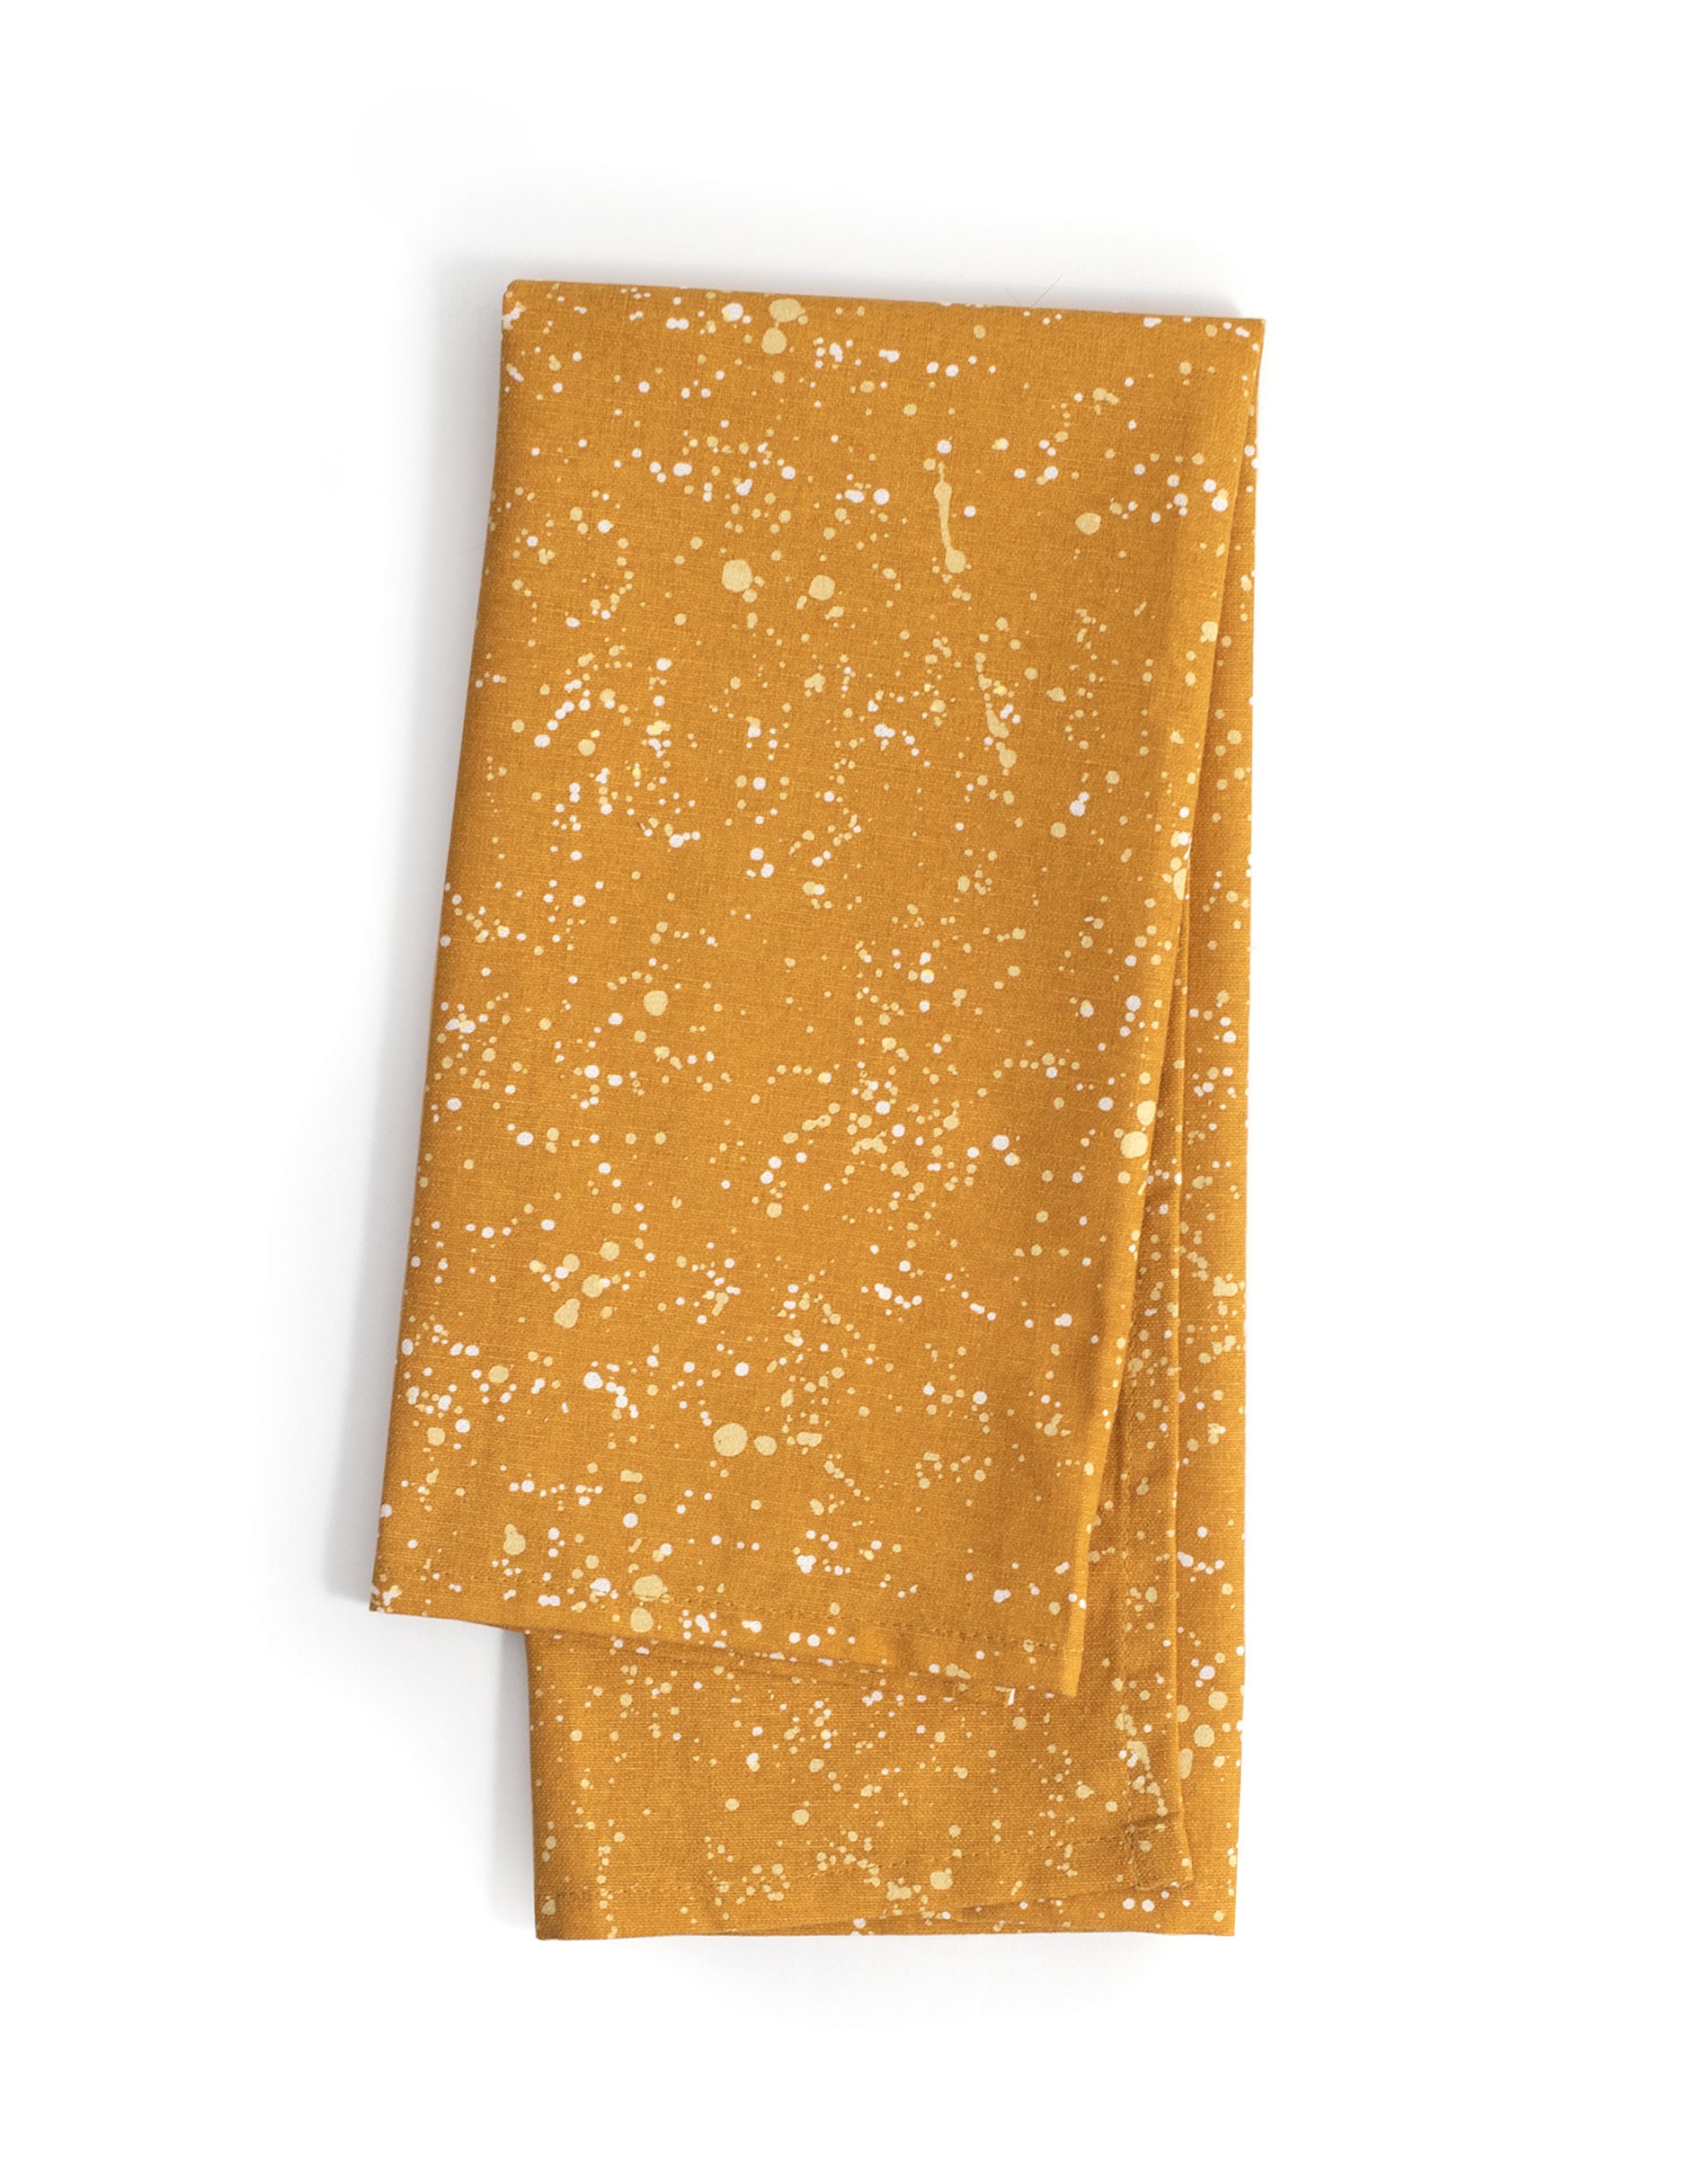 PACK OF SPARKLY CHRISTMAS KITCHEN TOWELS (PACK OF 2) - Gold